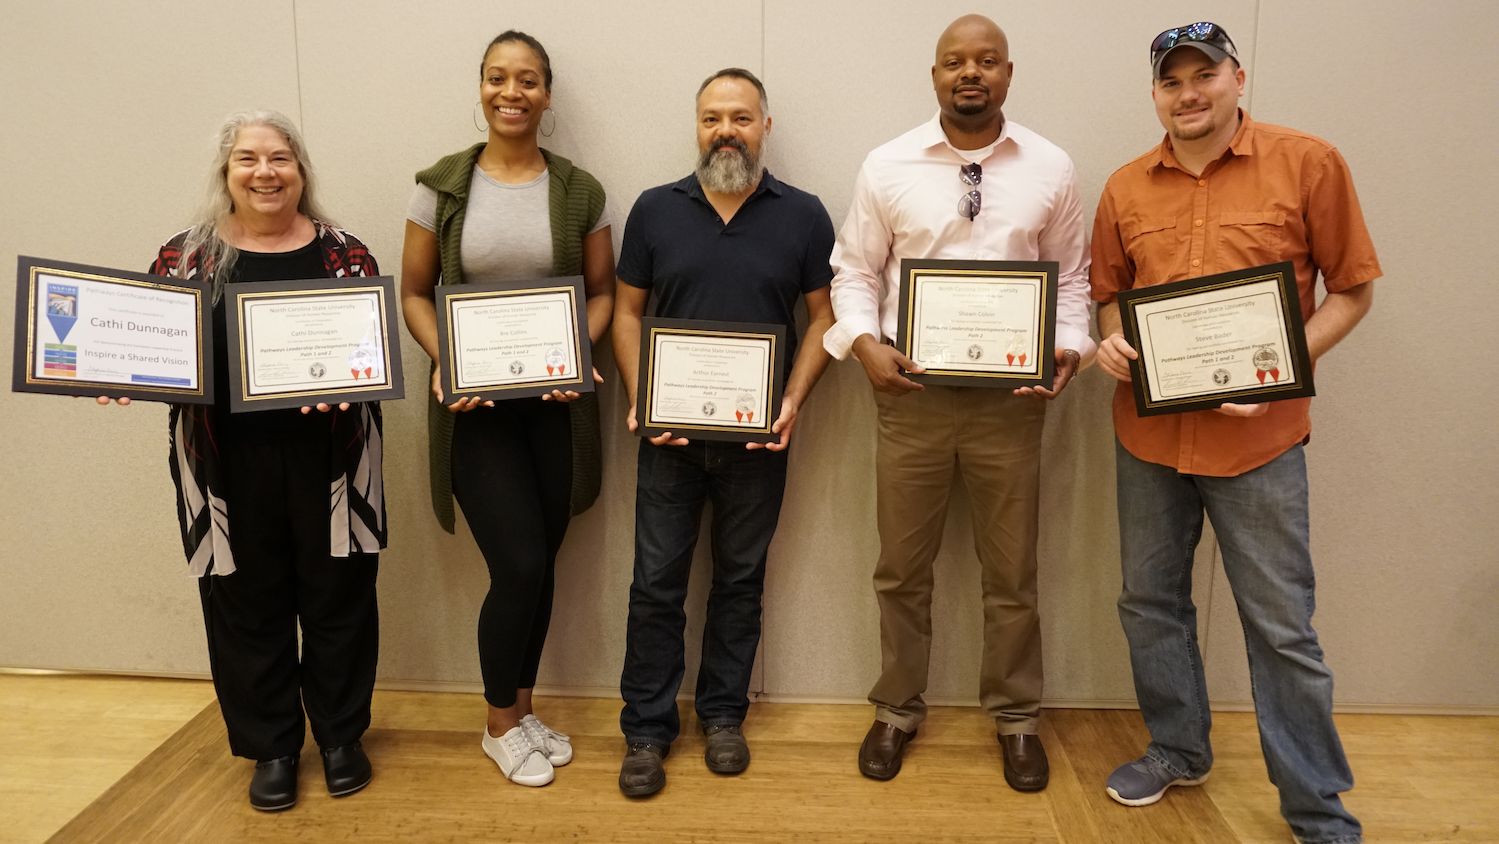 Photo of Cathi Dunnagan, Breanna Collins, Arthur Earnest, Shawn Colvin and Steve Bader with their Pathways graduation certificates